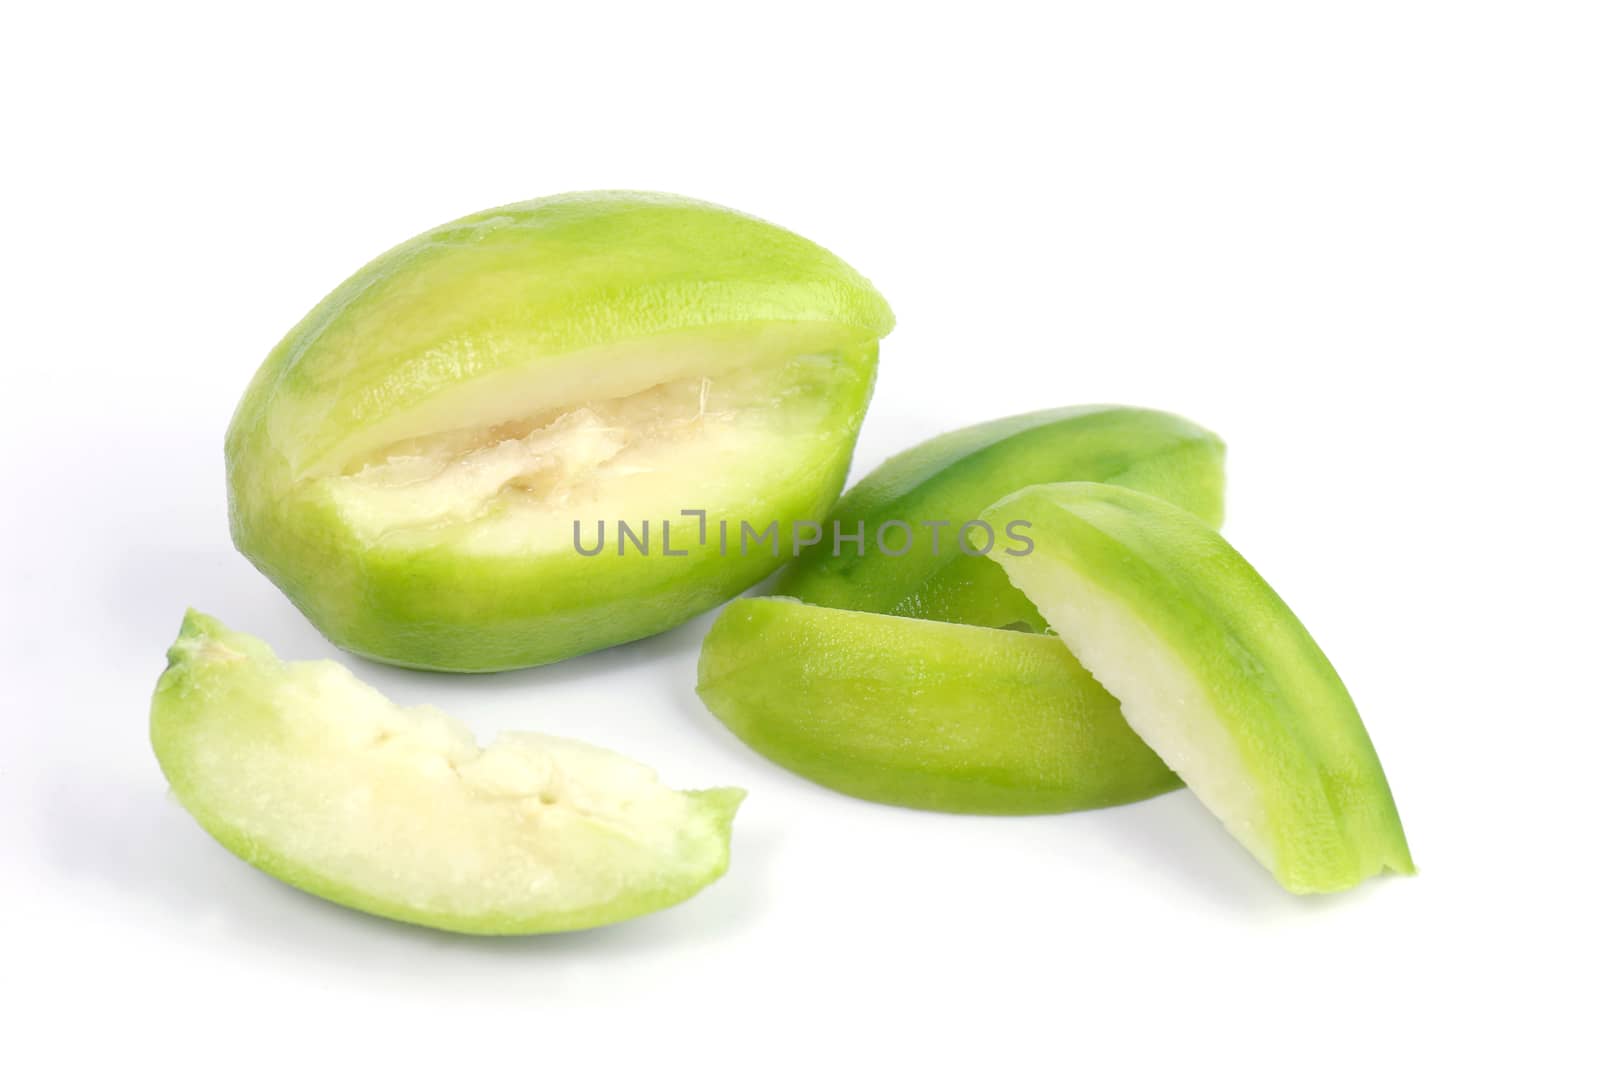 Ma Kok Nam (Thai word), Elaeocarpus hygrophilus Kurz fruits on white background, the fruits are used as foods in some Southeast Asian countries like Thailand by cgdeaw